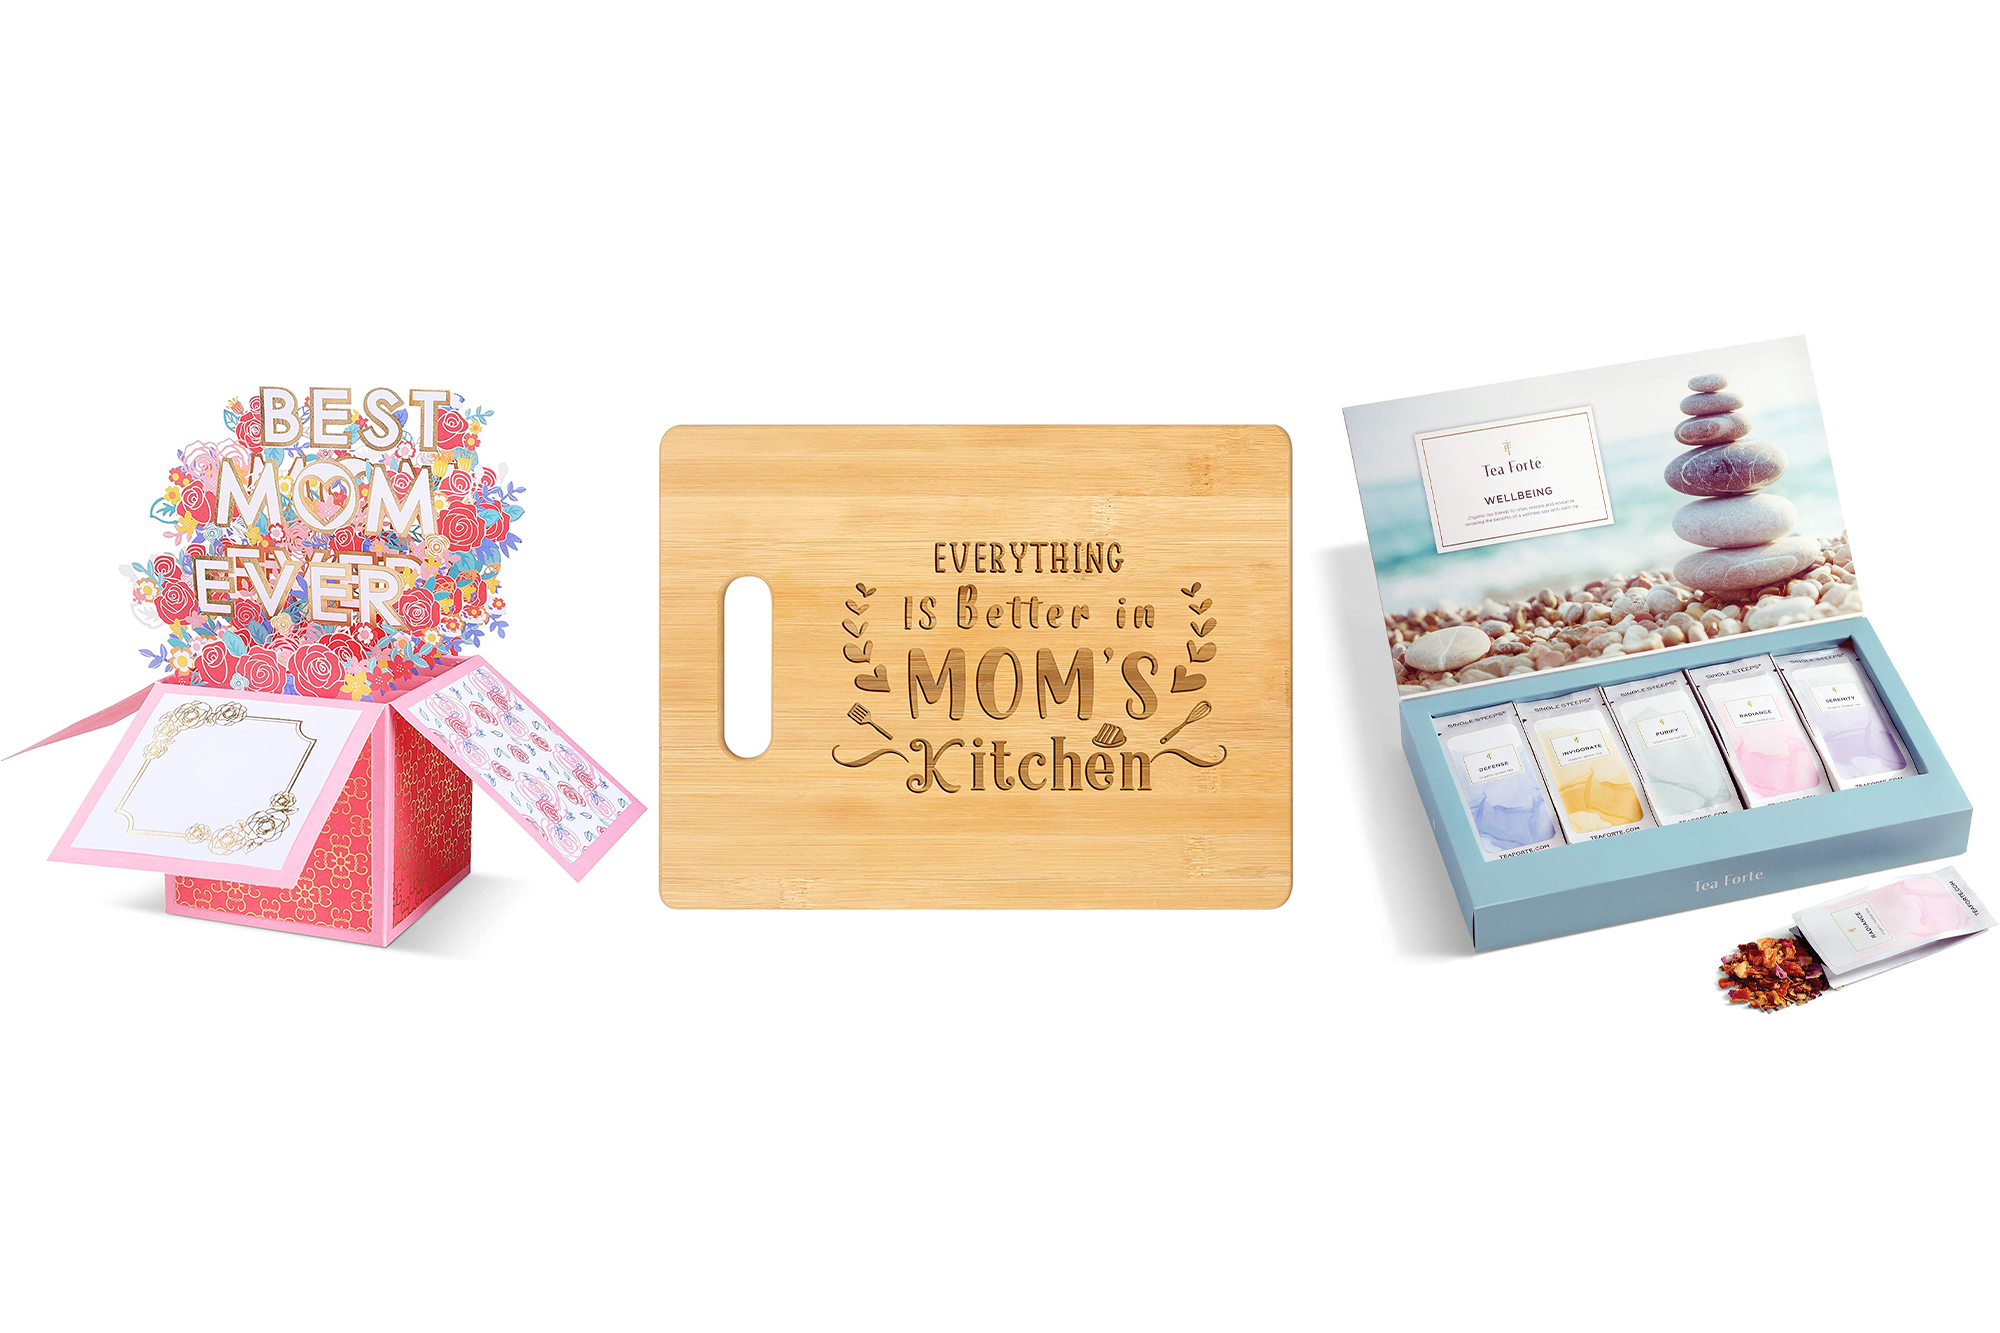 My Best Gift Ideas for Mom on Mother's Day